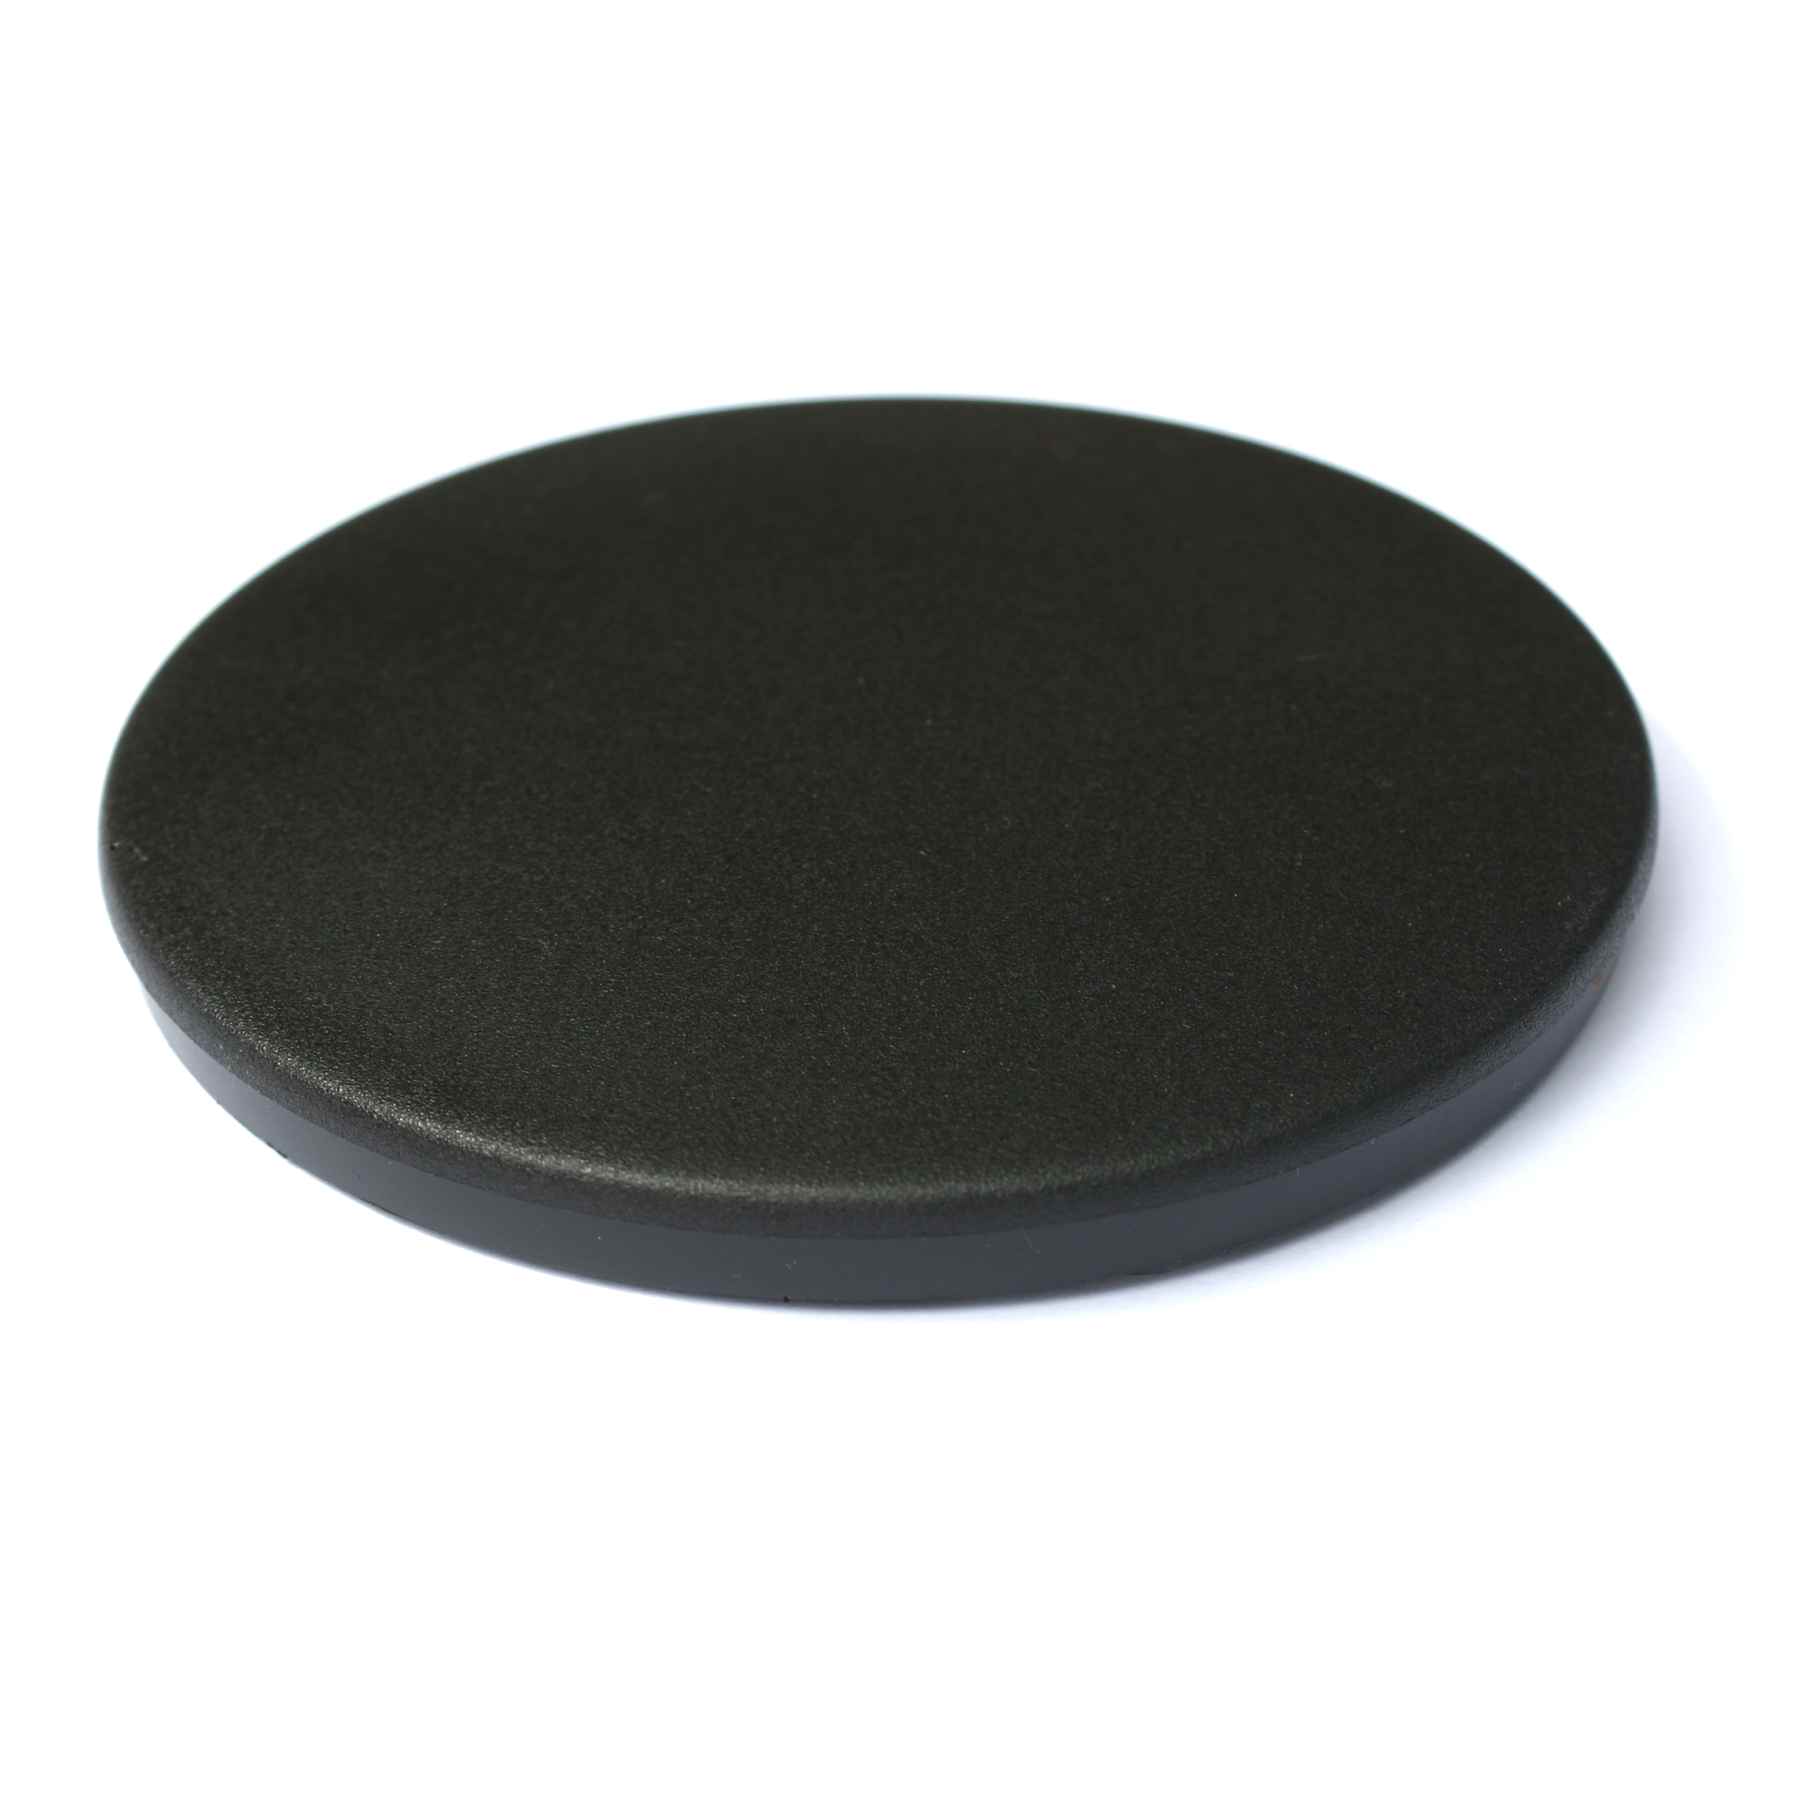 Lens Cap for Tiffen 77mm Variable ND